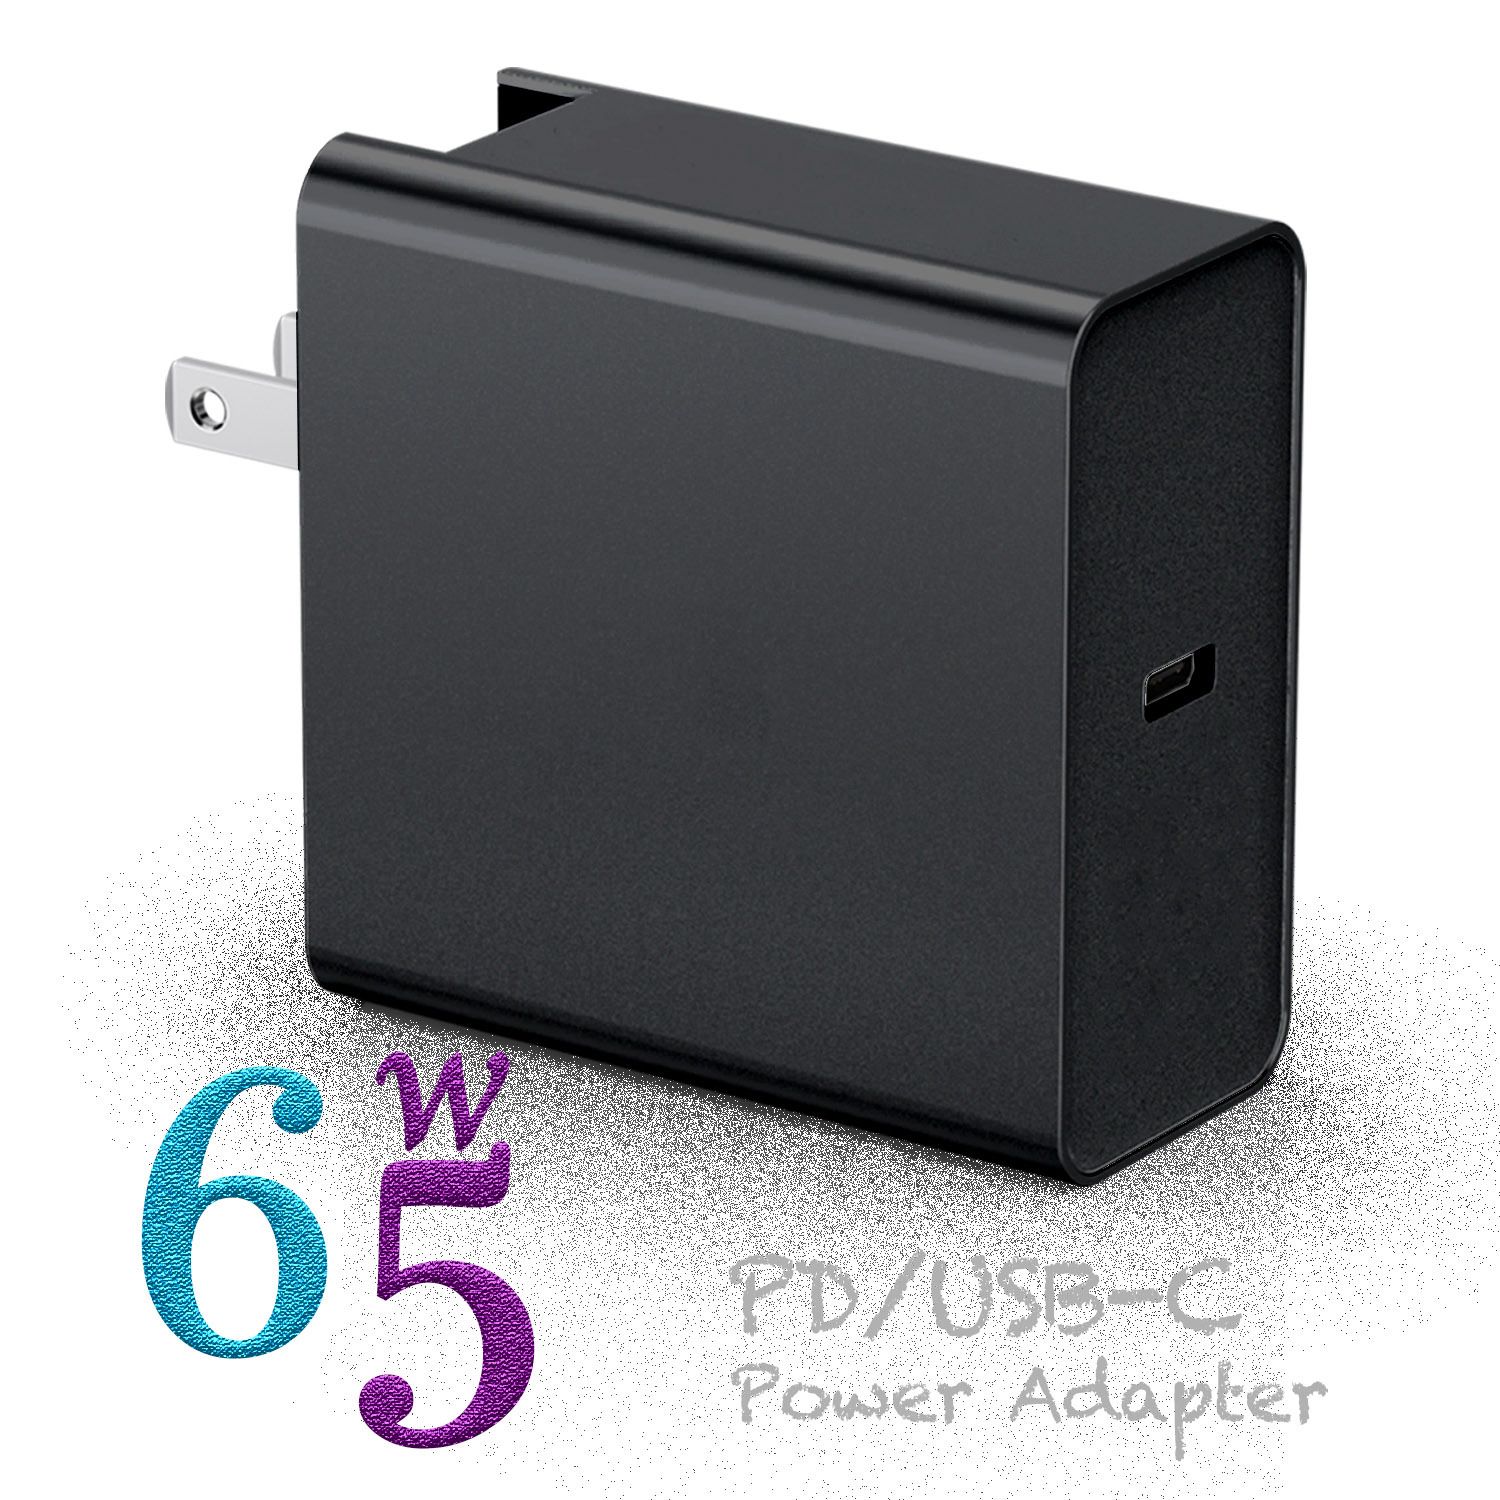 Bakeey-PD65W-Type-C-Folding-Portable-Display-Fast-Charging-USB-Charger-Adapter-For-iPhone-XS-11Pro-H-1621637